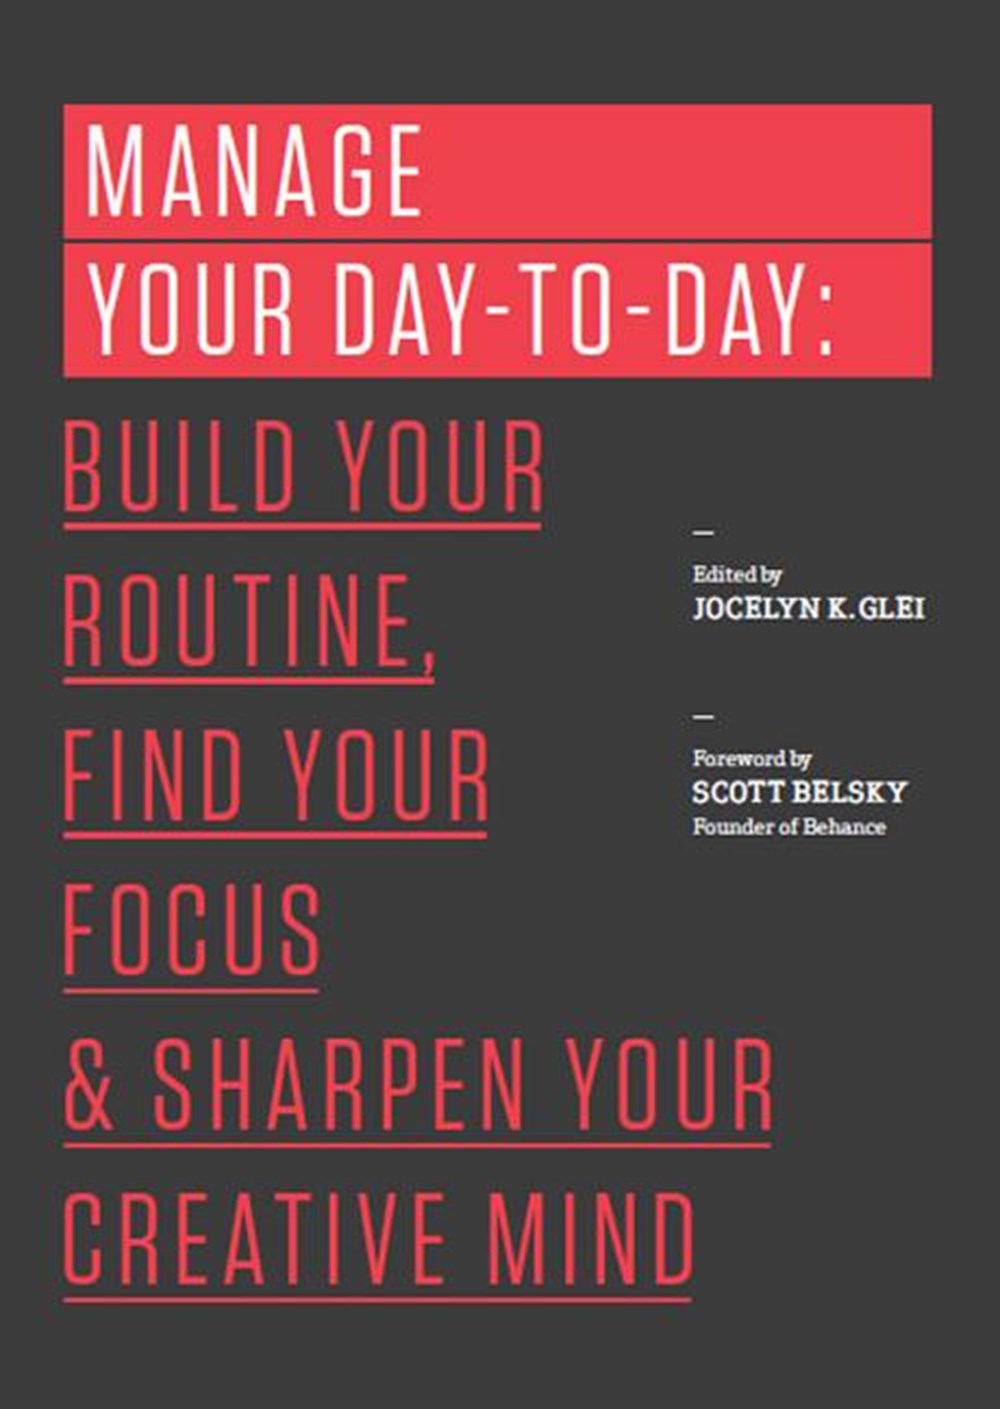 Manage Your Day-To-Day Build Your Routine, Find Your Focus, and Sharpen Your Creative Mind